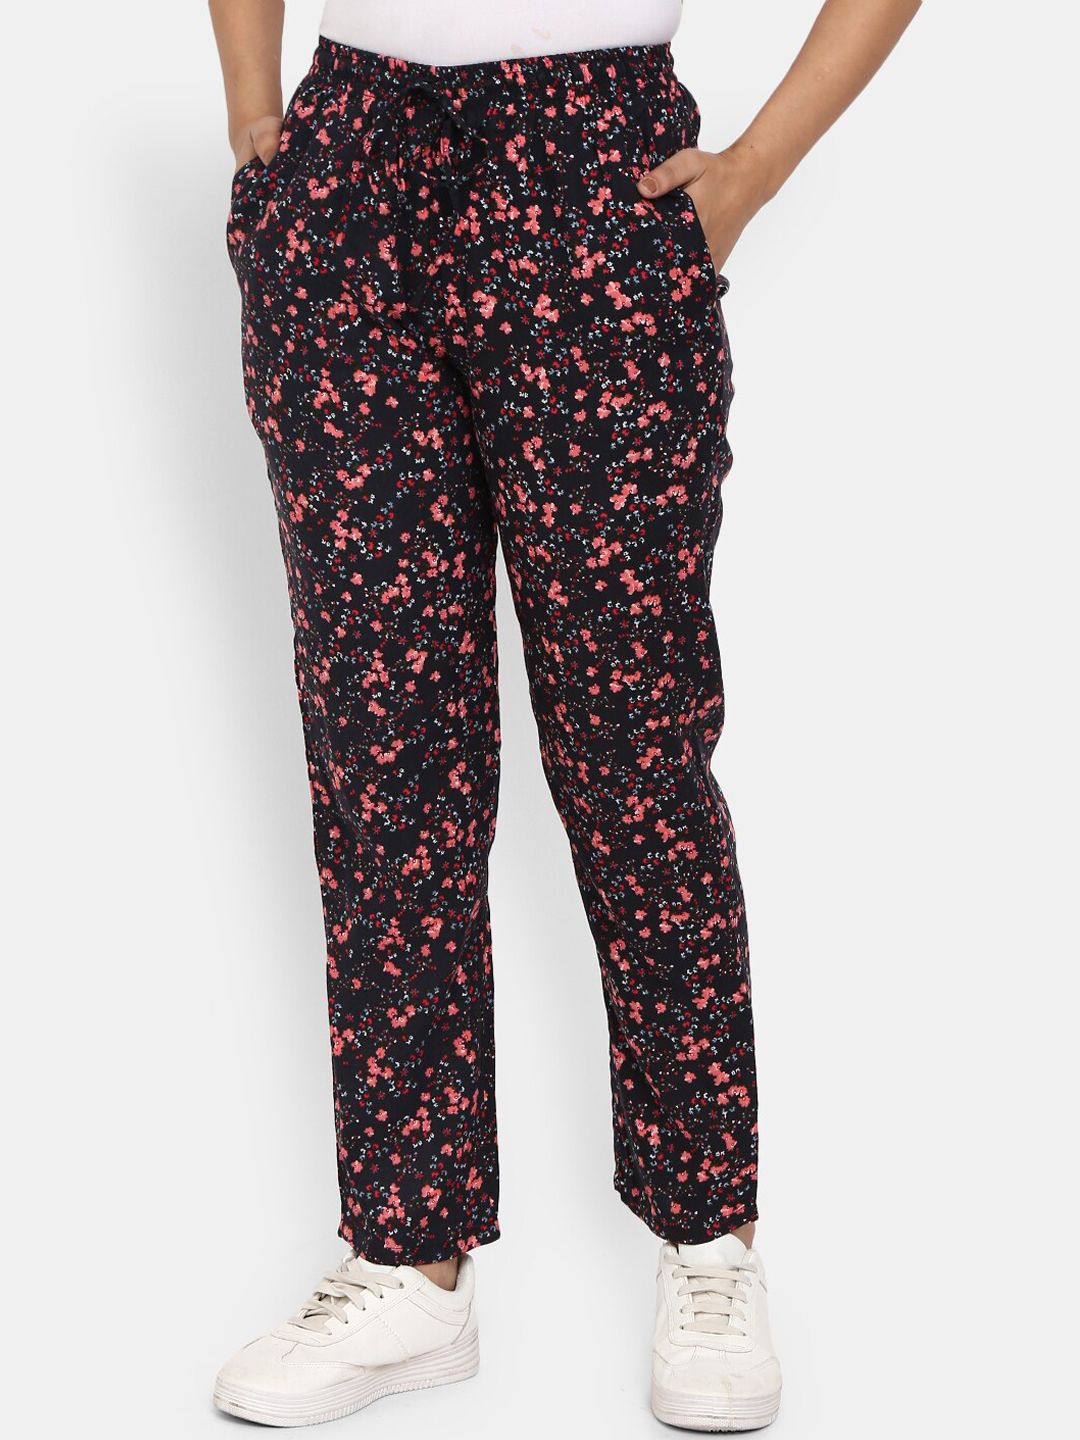 V-Mart Women Black & Peach-Coloured Printed Lounge Pants Price in India